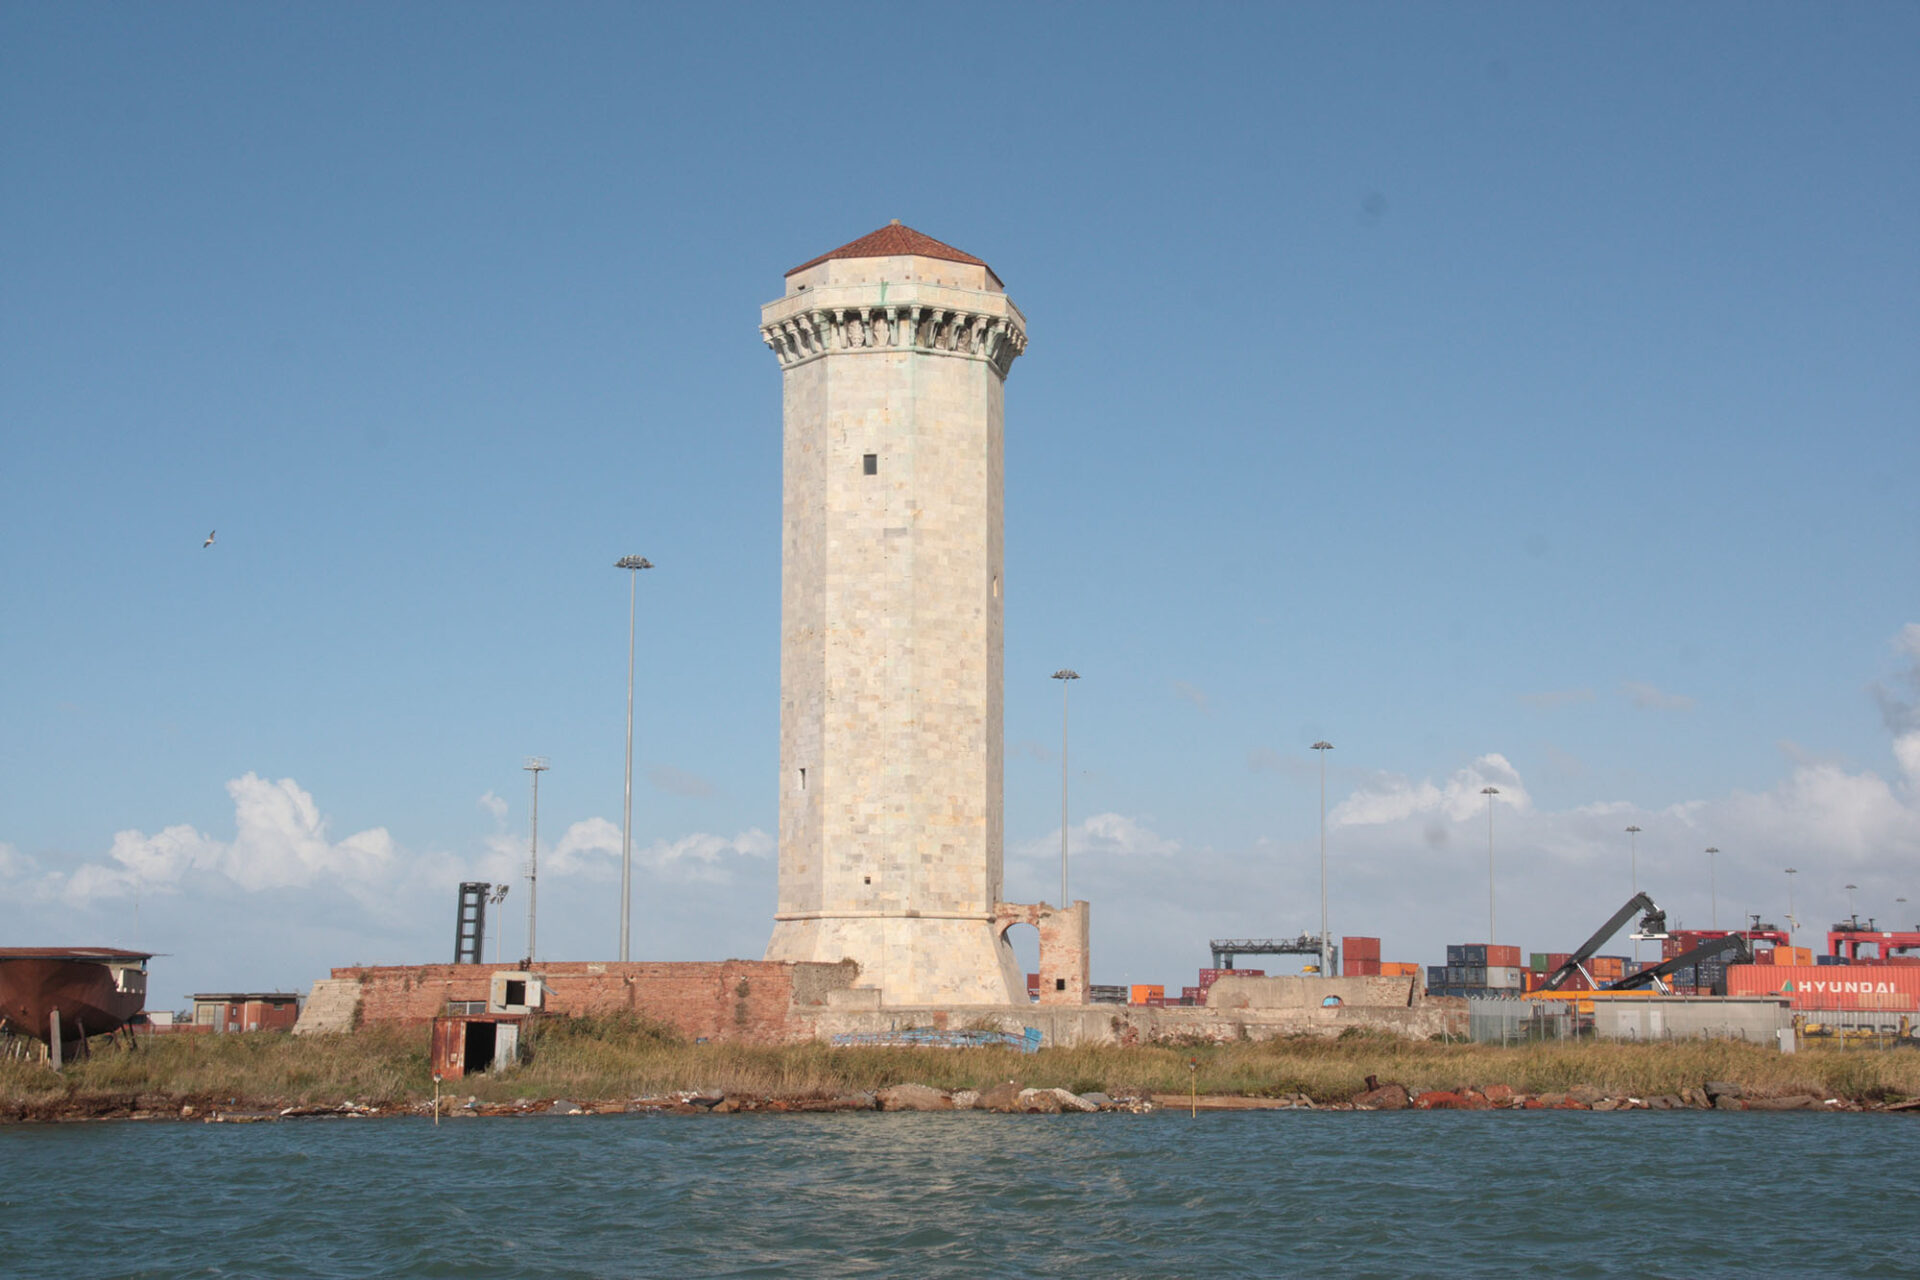 The towers of Livorno and Capraia